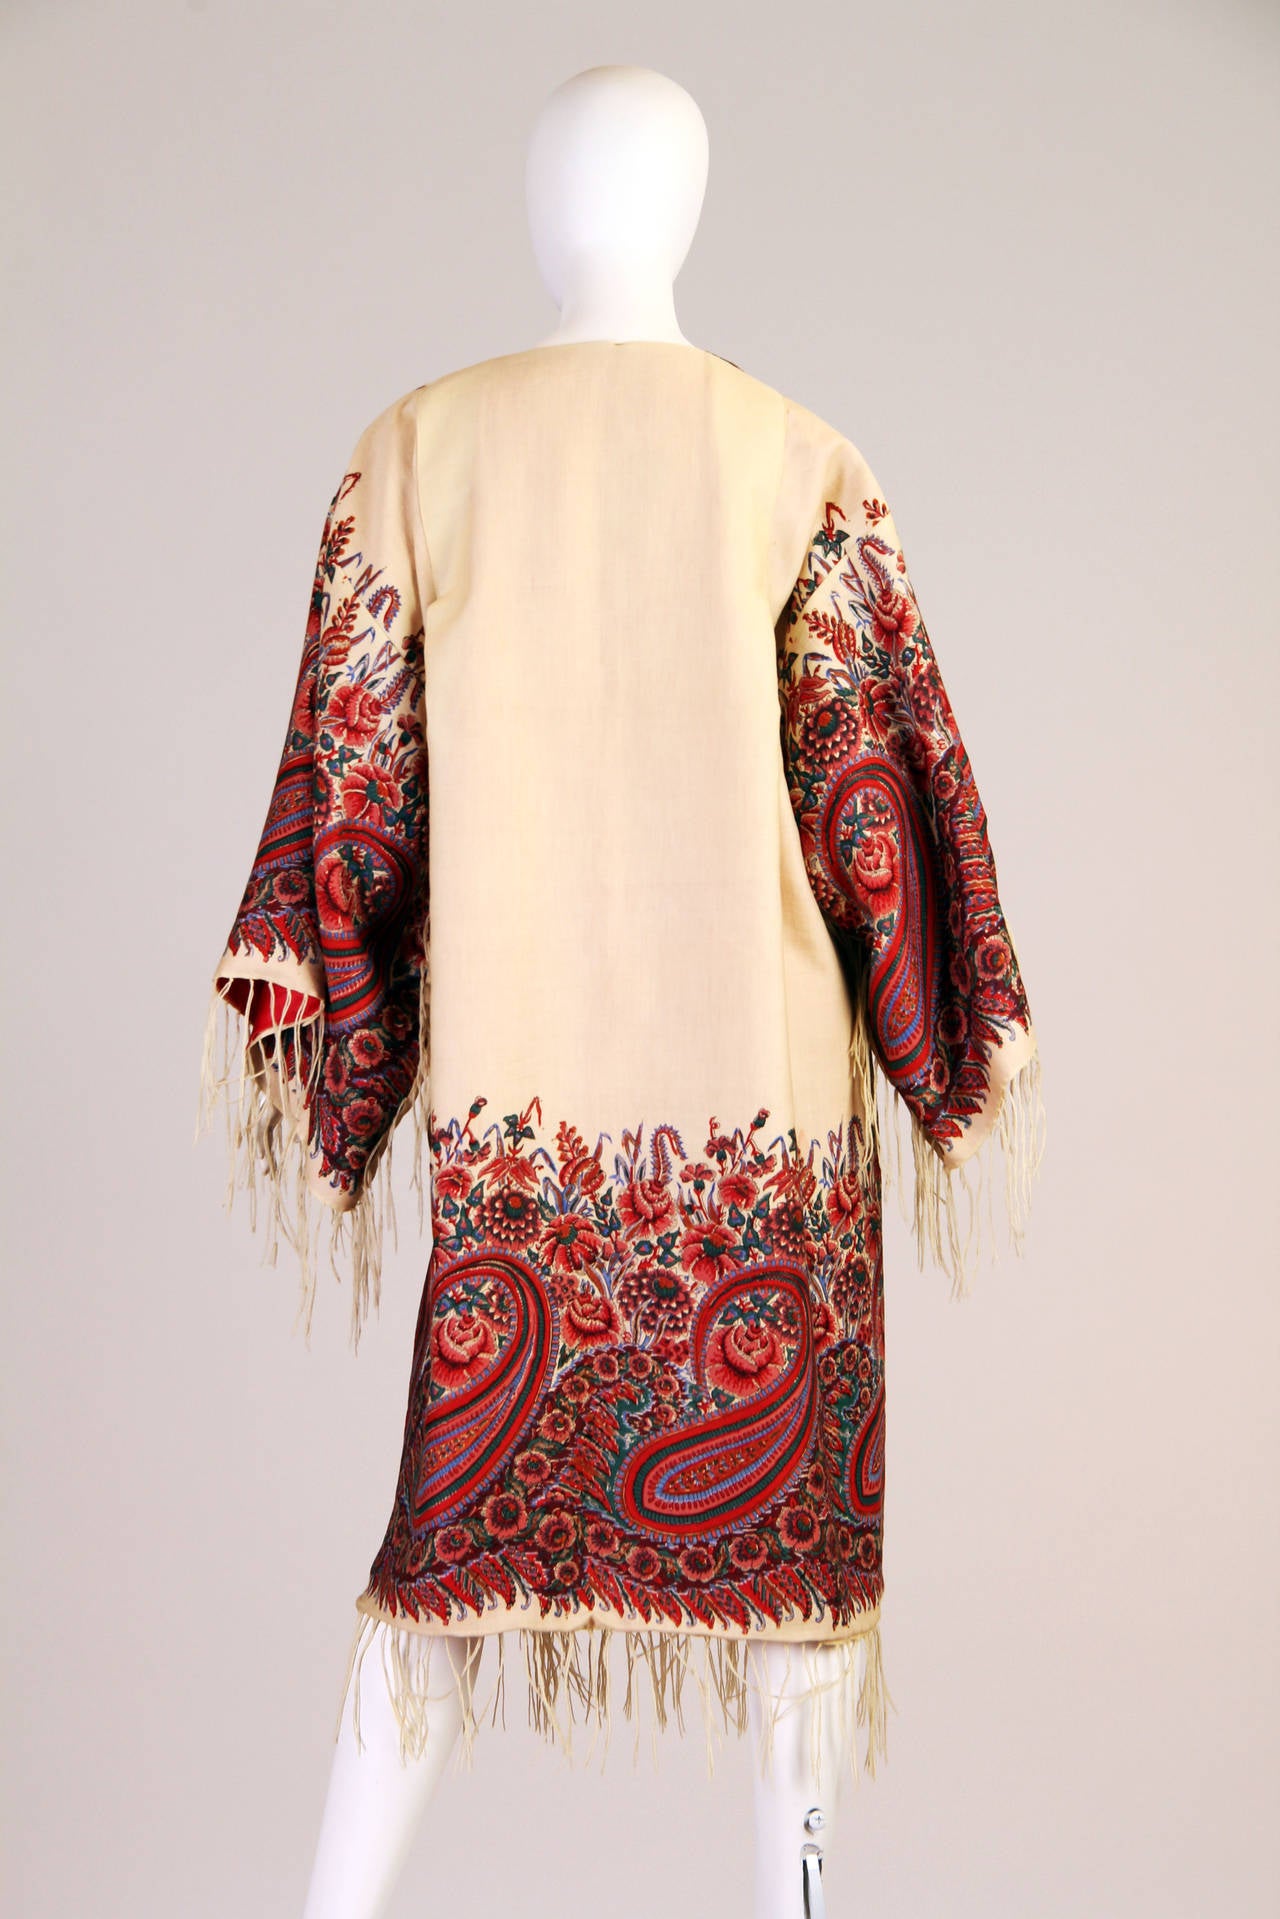 Women's 1920s Coat made from a Victorian Wool Shawl Lined in Silk